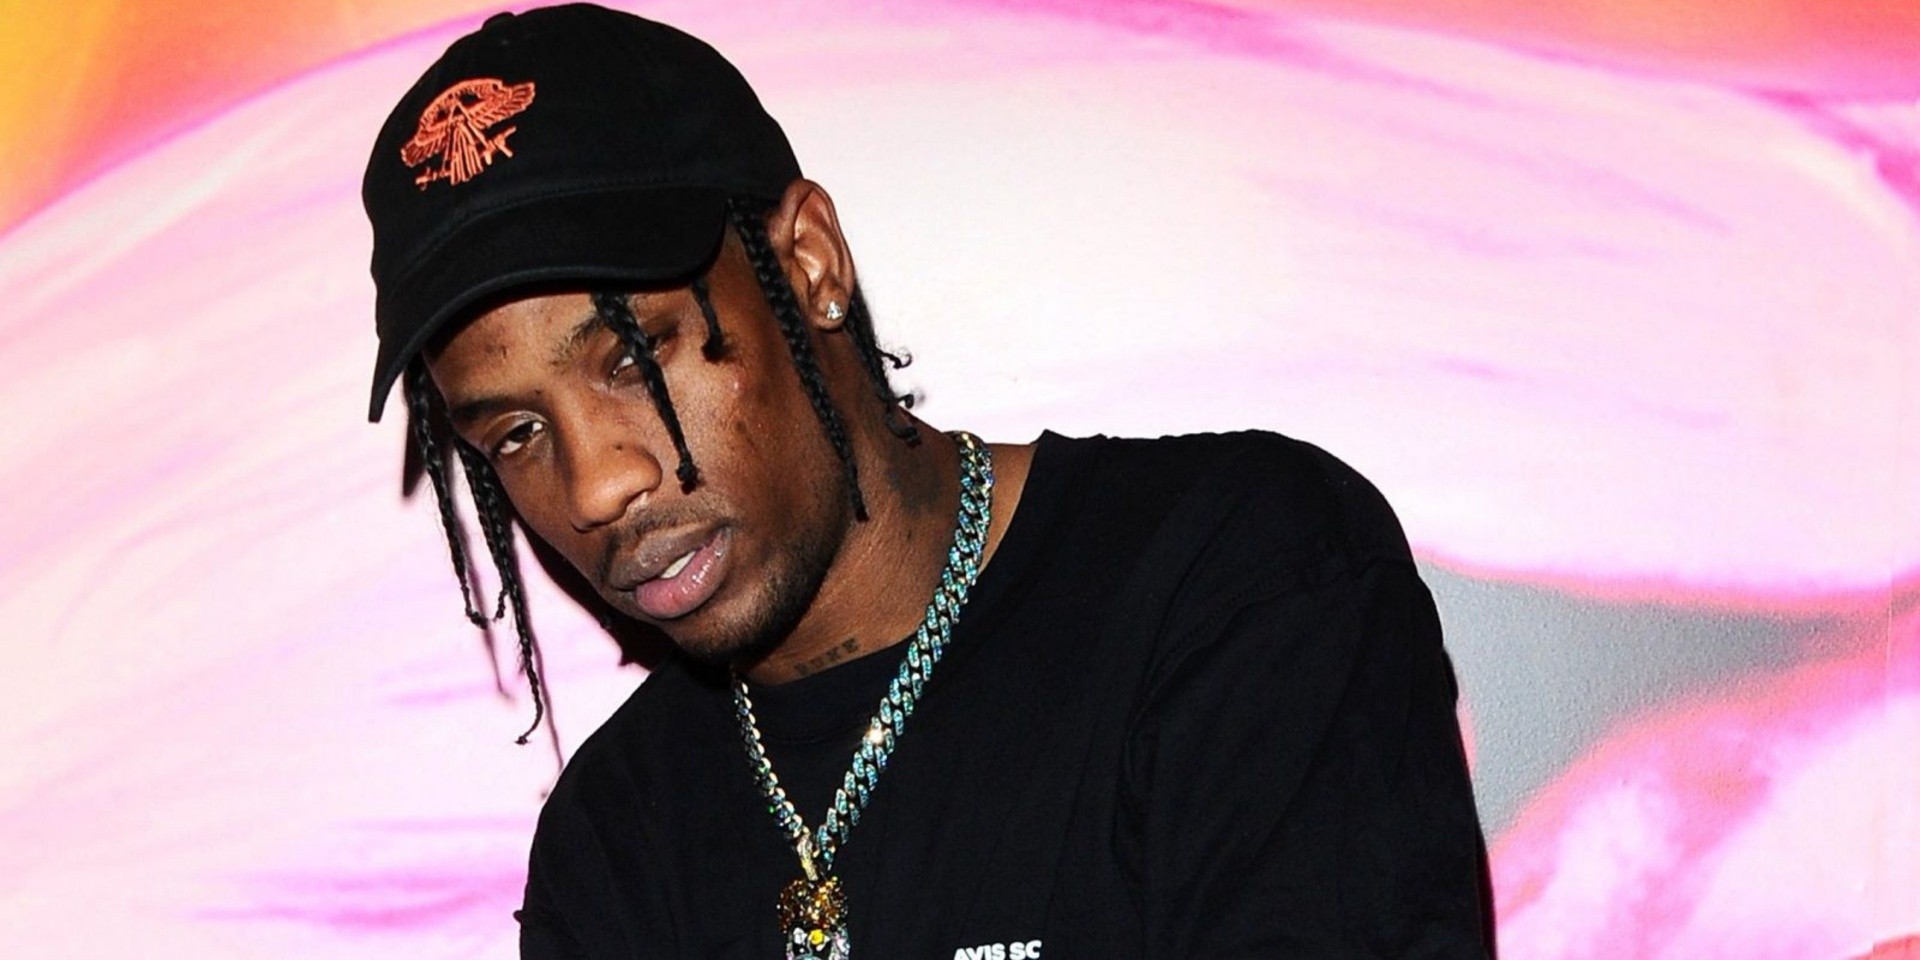 Travis Scott teases new song 'Highest In The Room' at Rolling Loud Miami – watch